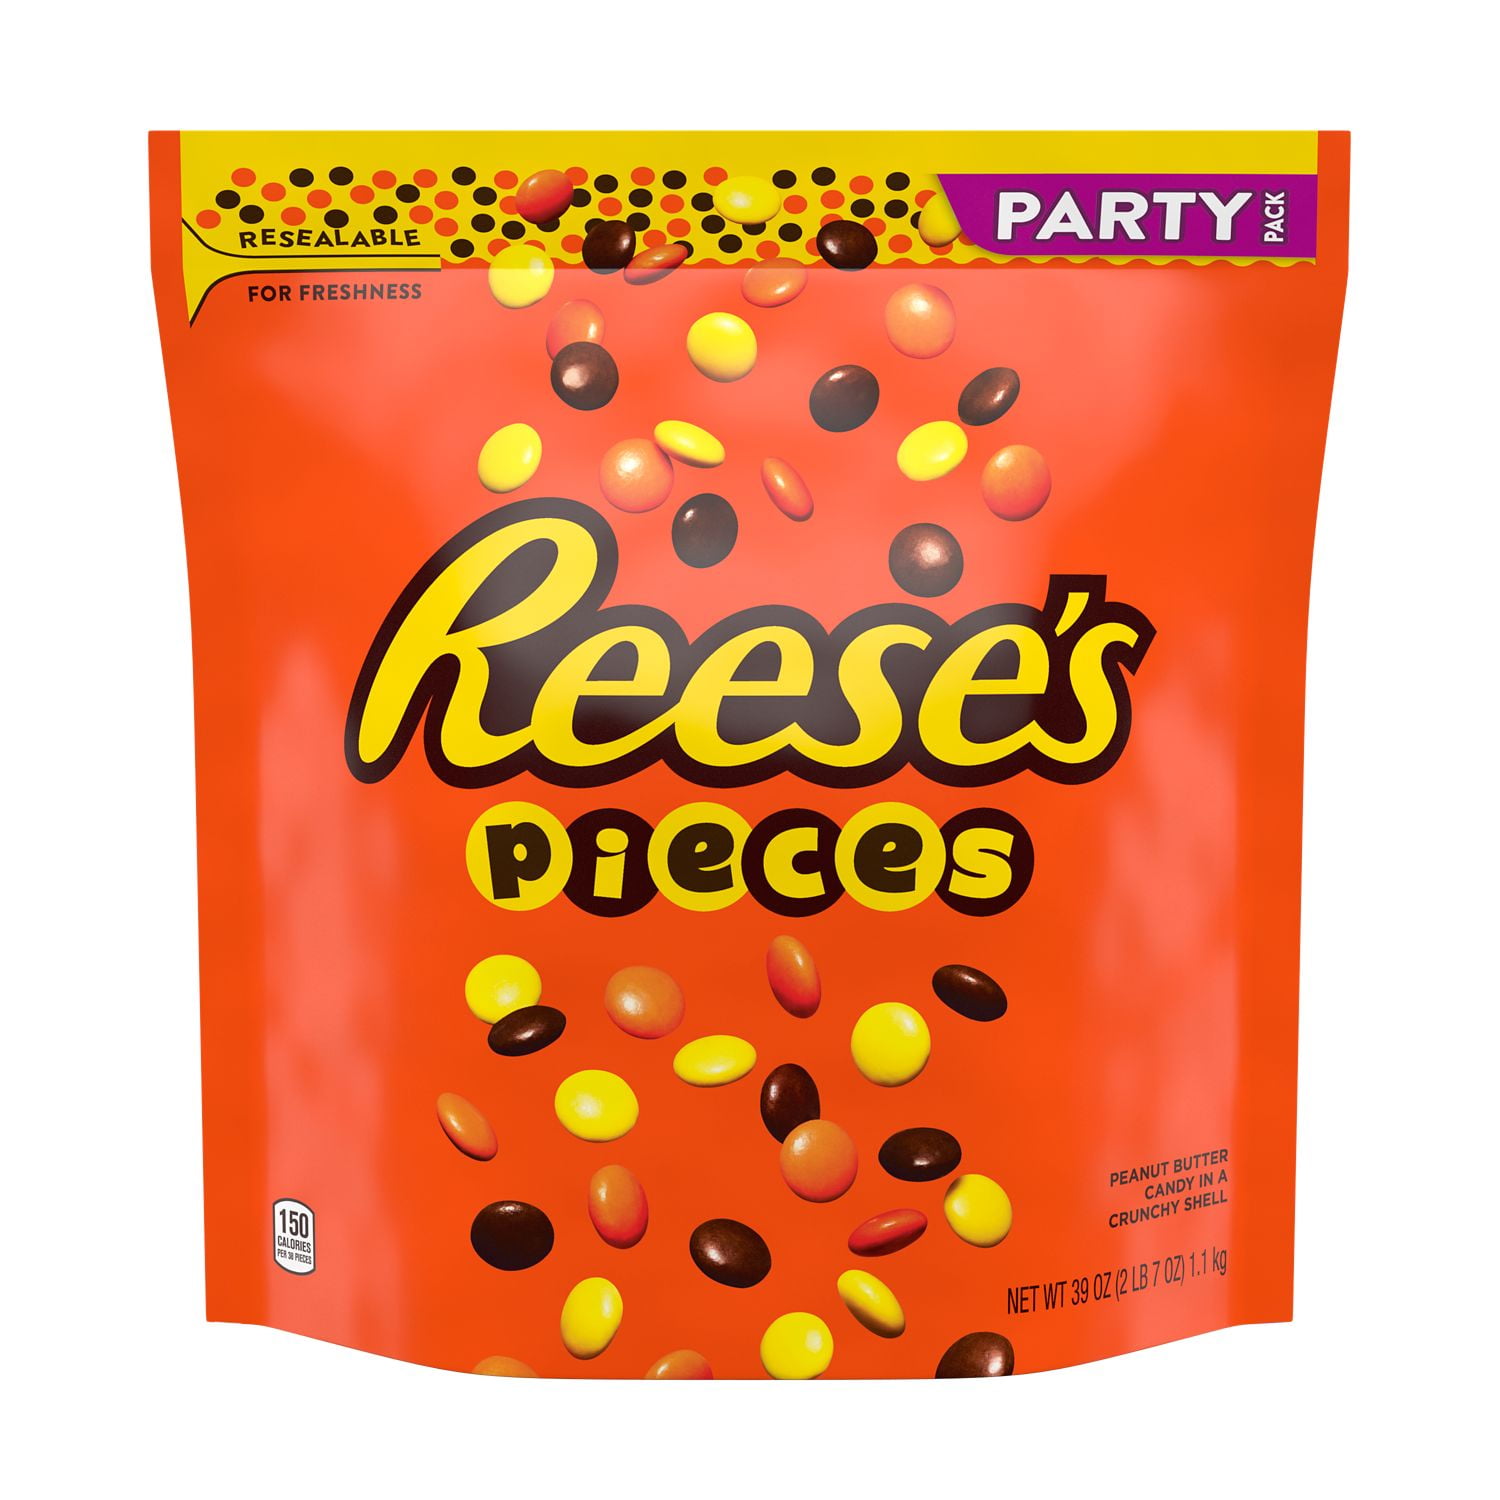 Reese's PIECES Peanut Butter Candy, Gluten Free, 39 oz, Resealable Bulk Party Pack